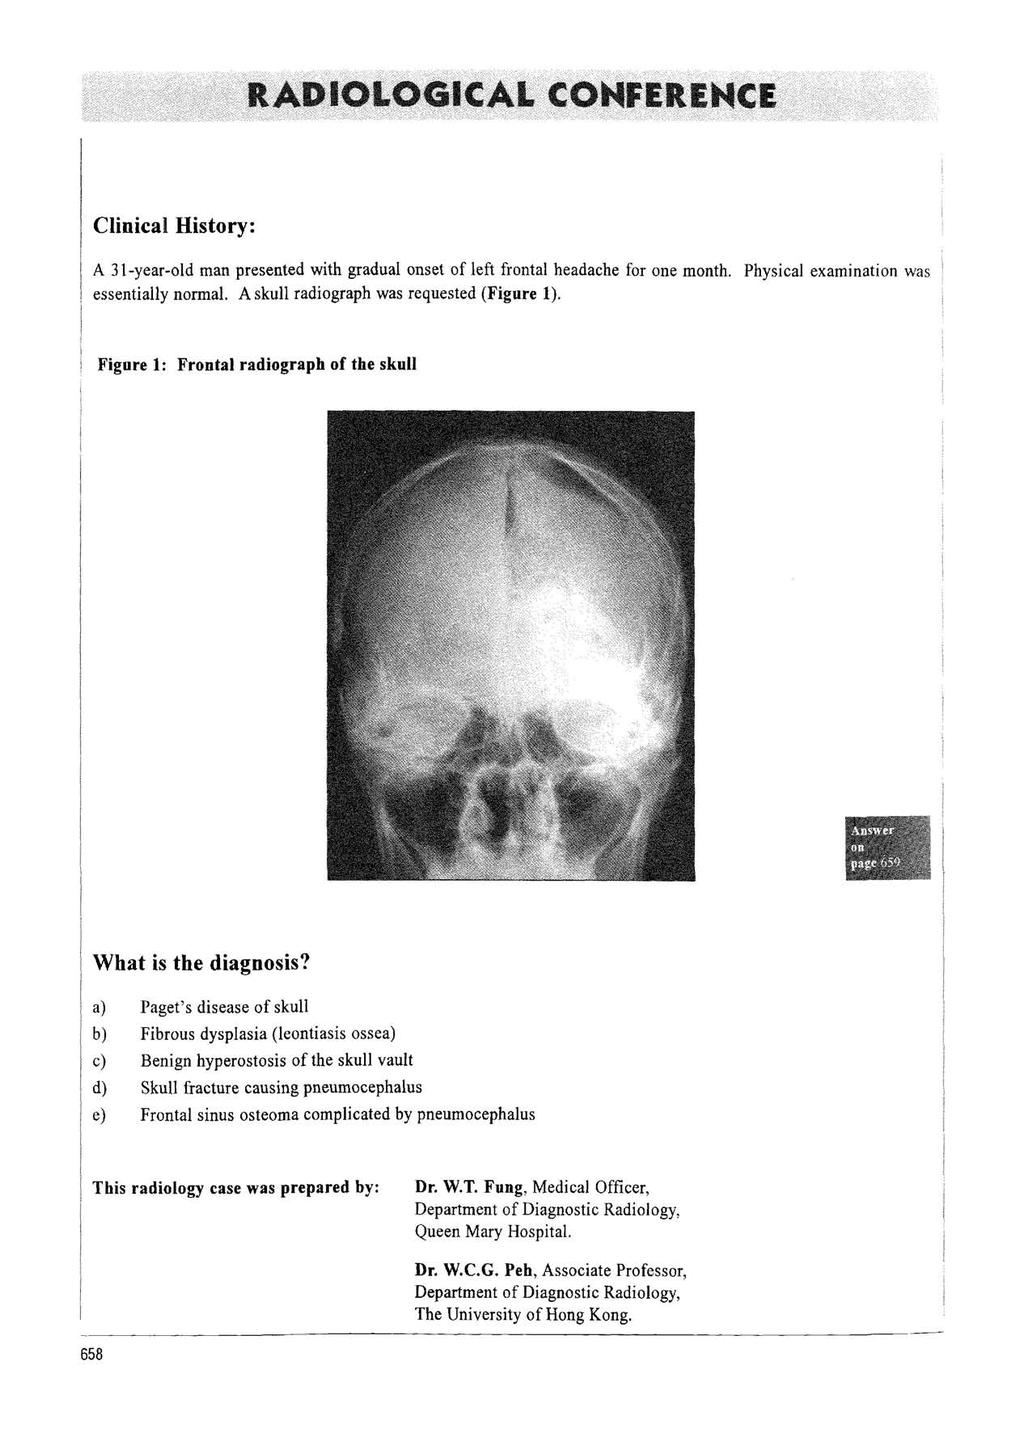 ICE Clinical History: A 31-year-old man presented with gradual onset of left frontal headache for one month. Physical examination was essentially normal. A skull radiograph was requested (Figure 1).